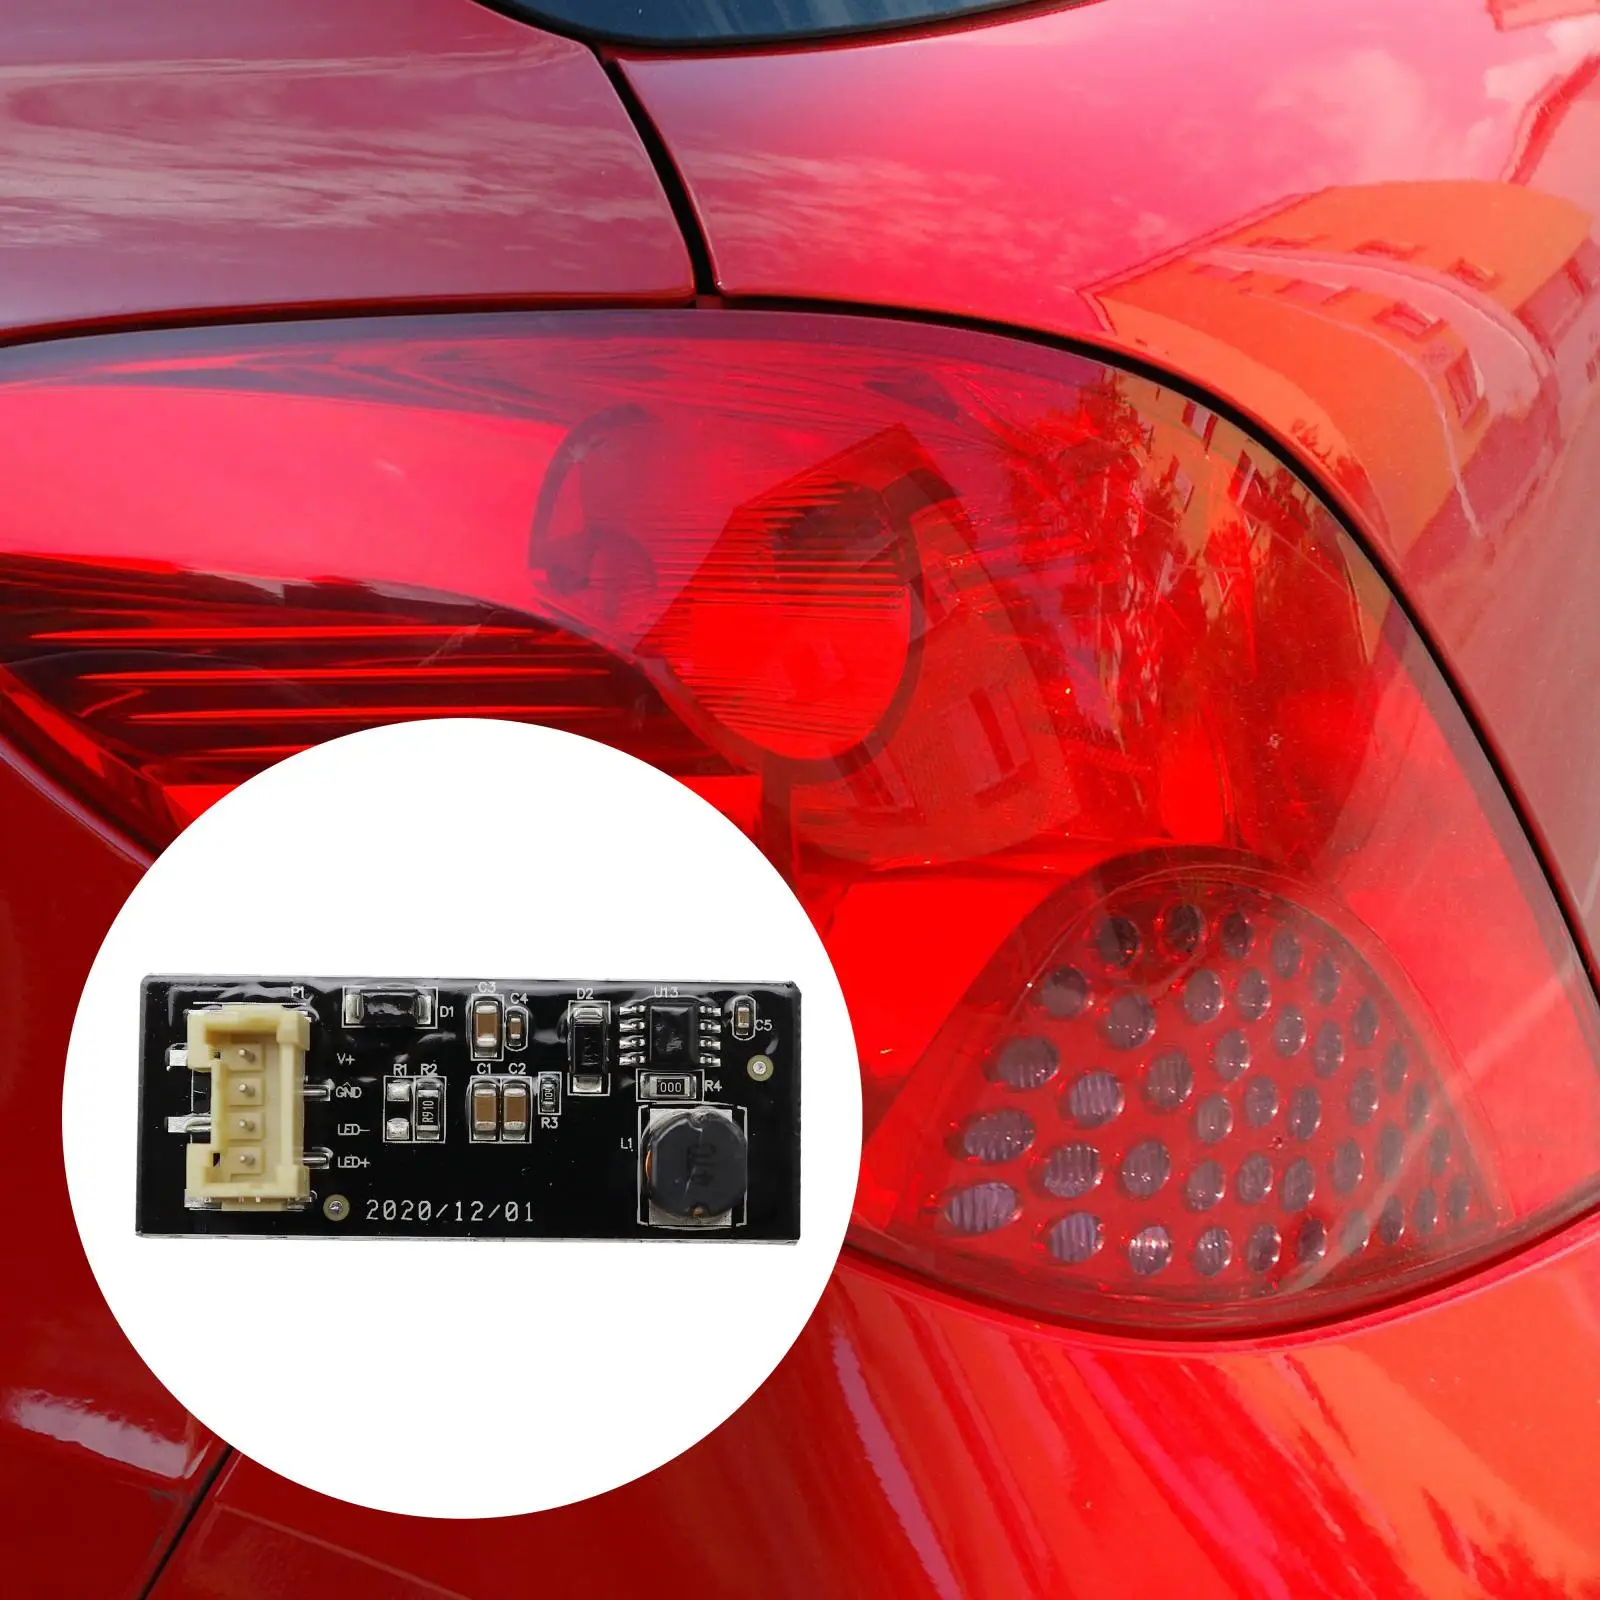 Good Quality Rear Light Plug And Play Repair Replacement Board Tail Light Led Chip for  X3 F25 2011-17